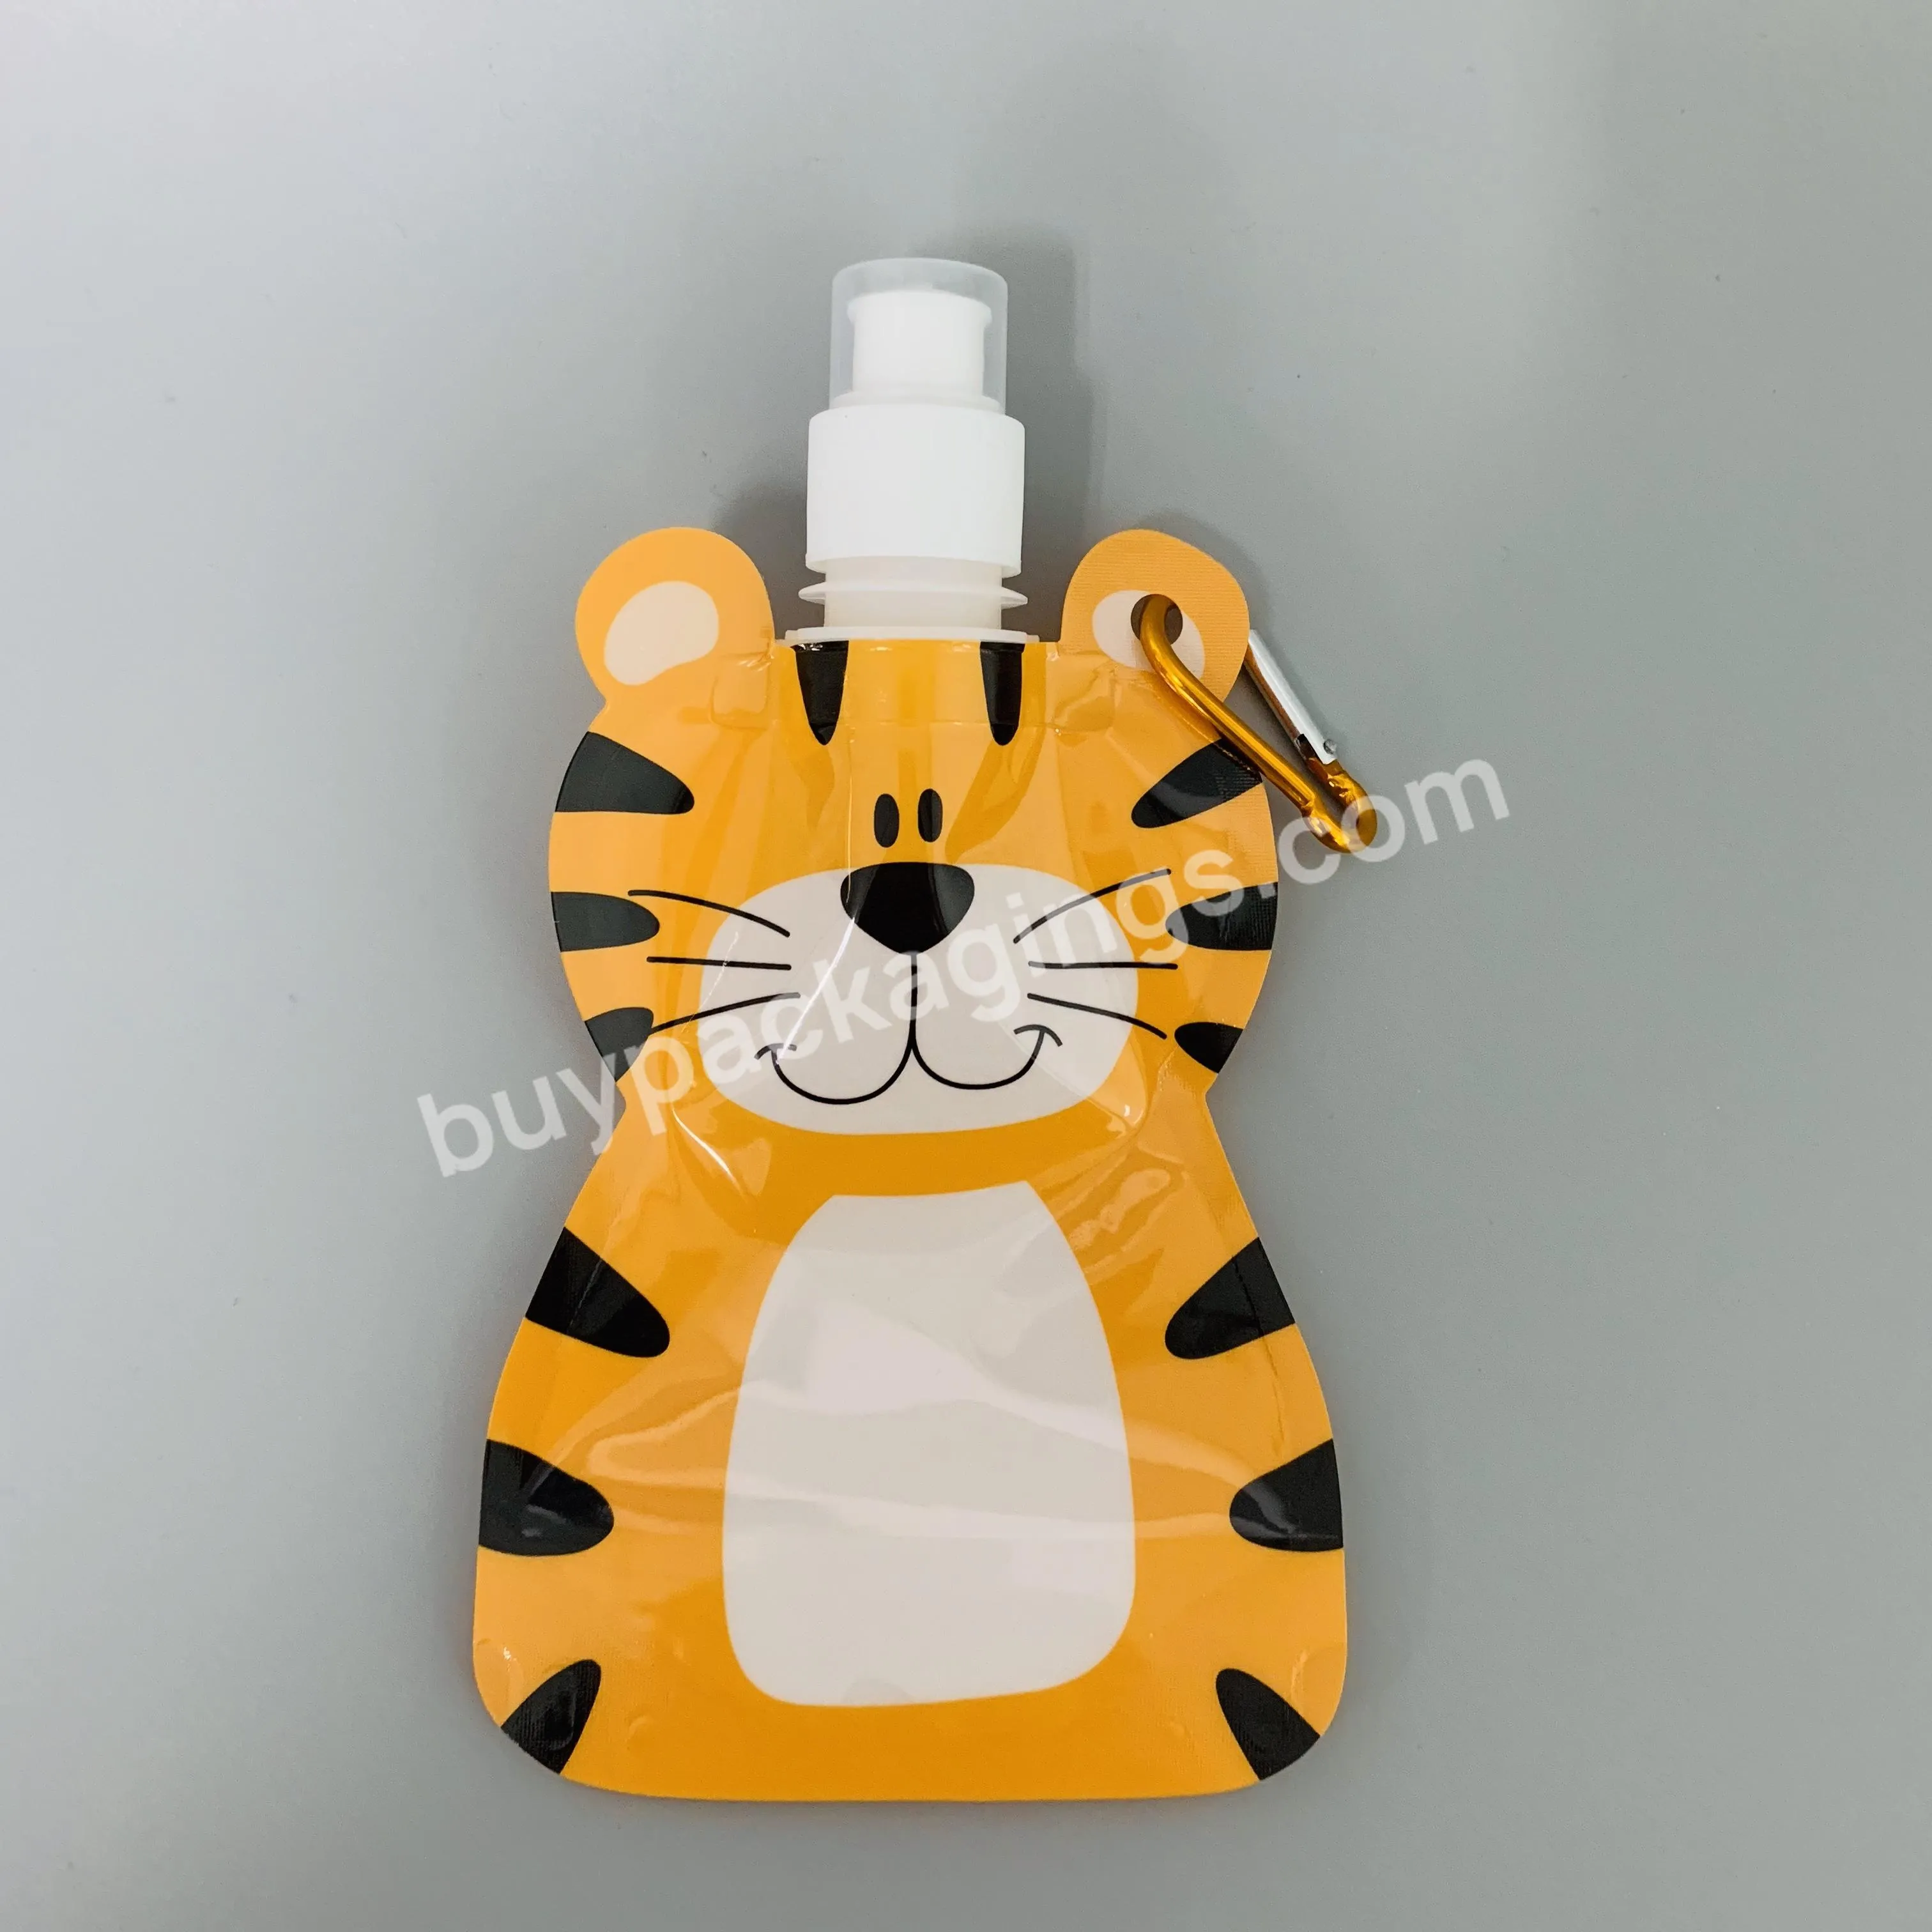 Reusable Customized Kids Sport Animal Shape Water Bottle Plastic Drinking Water Bag With Carabiner